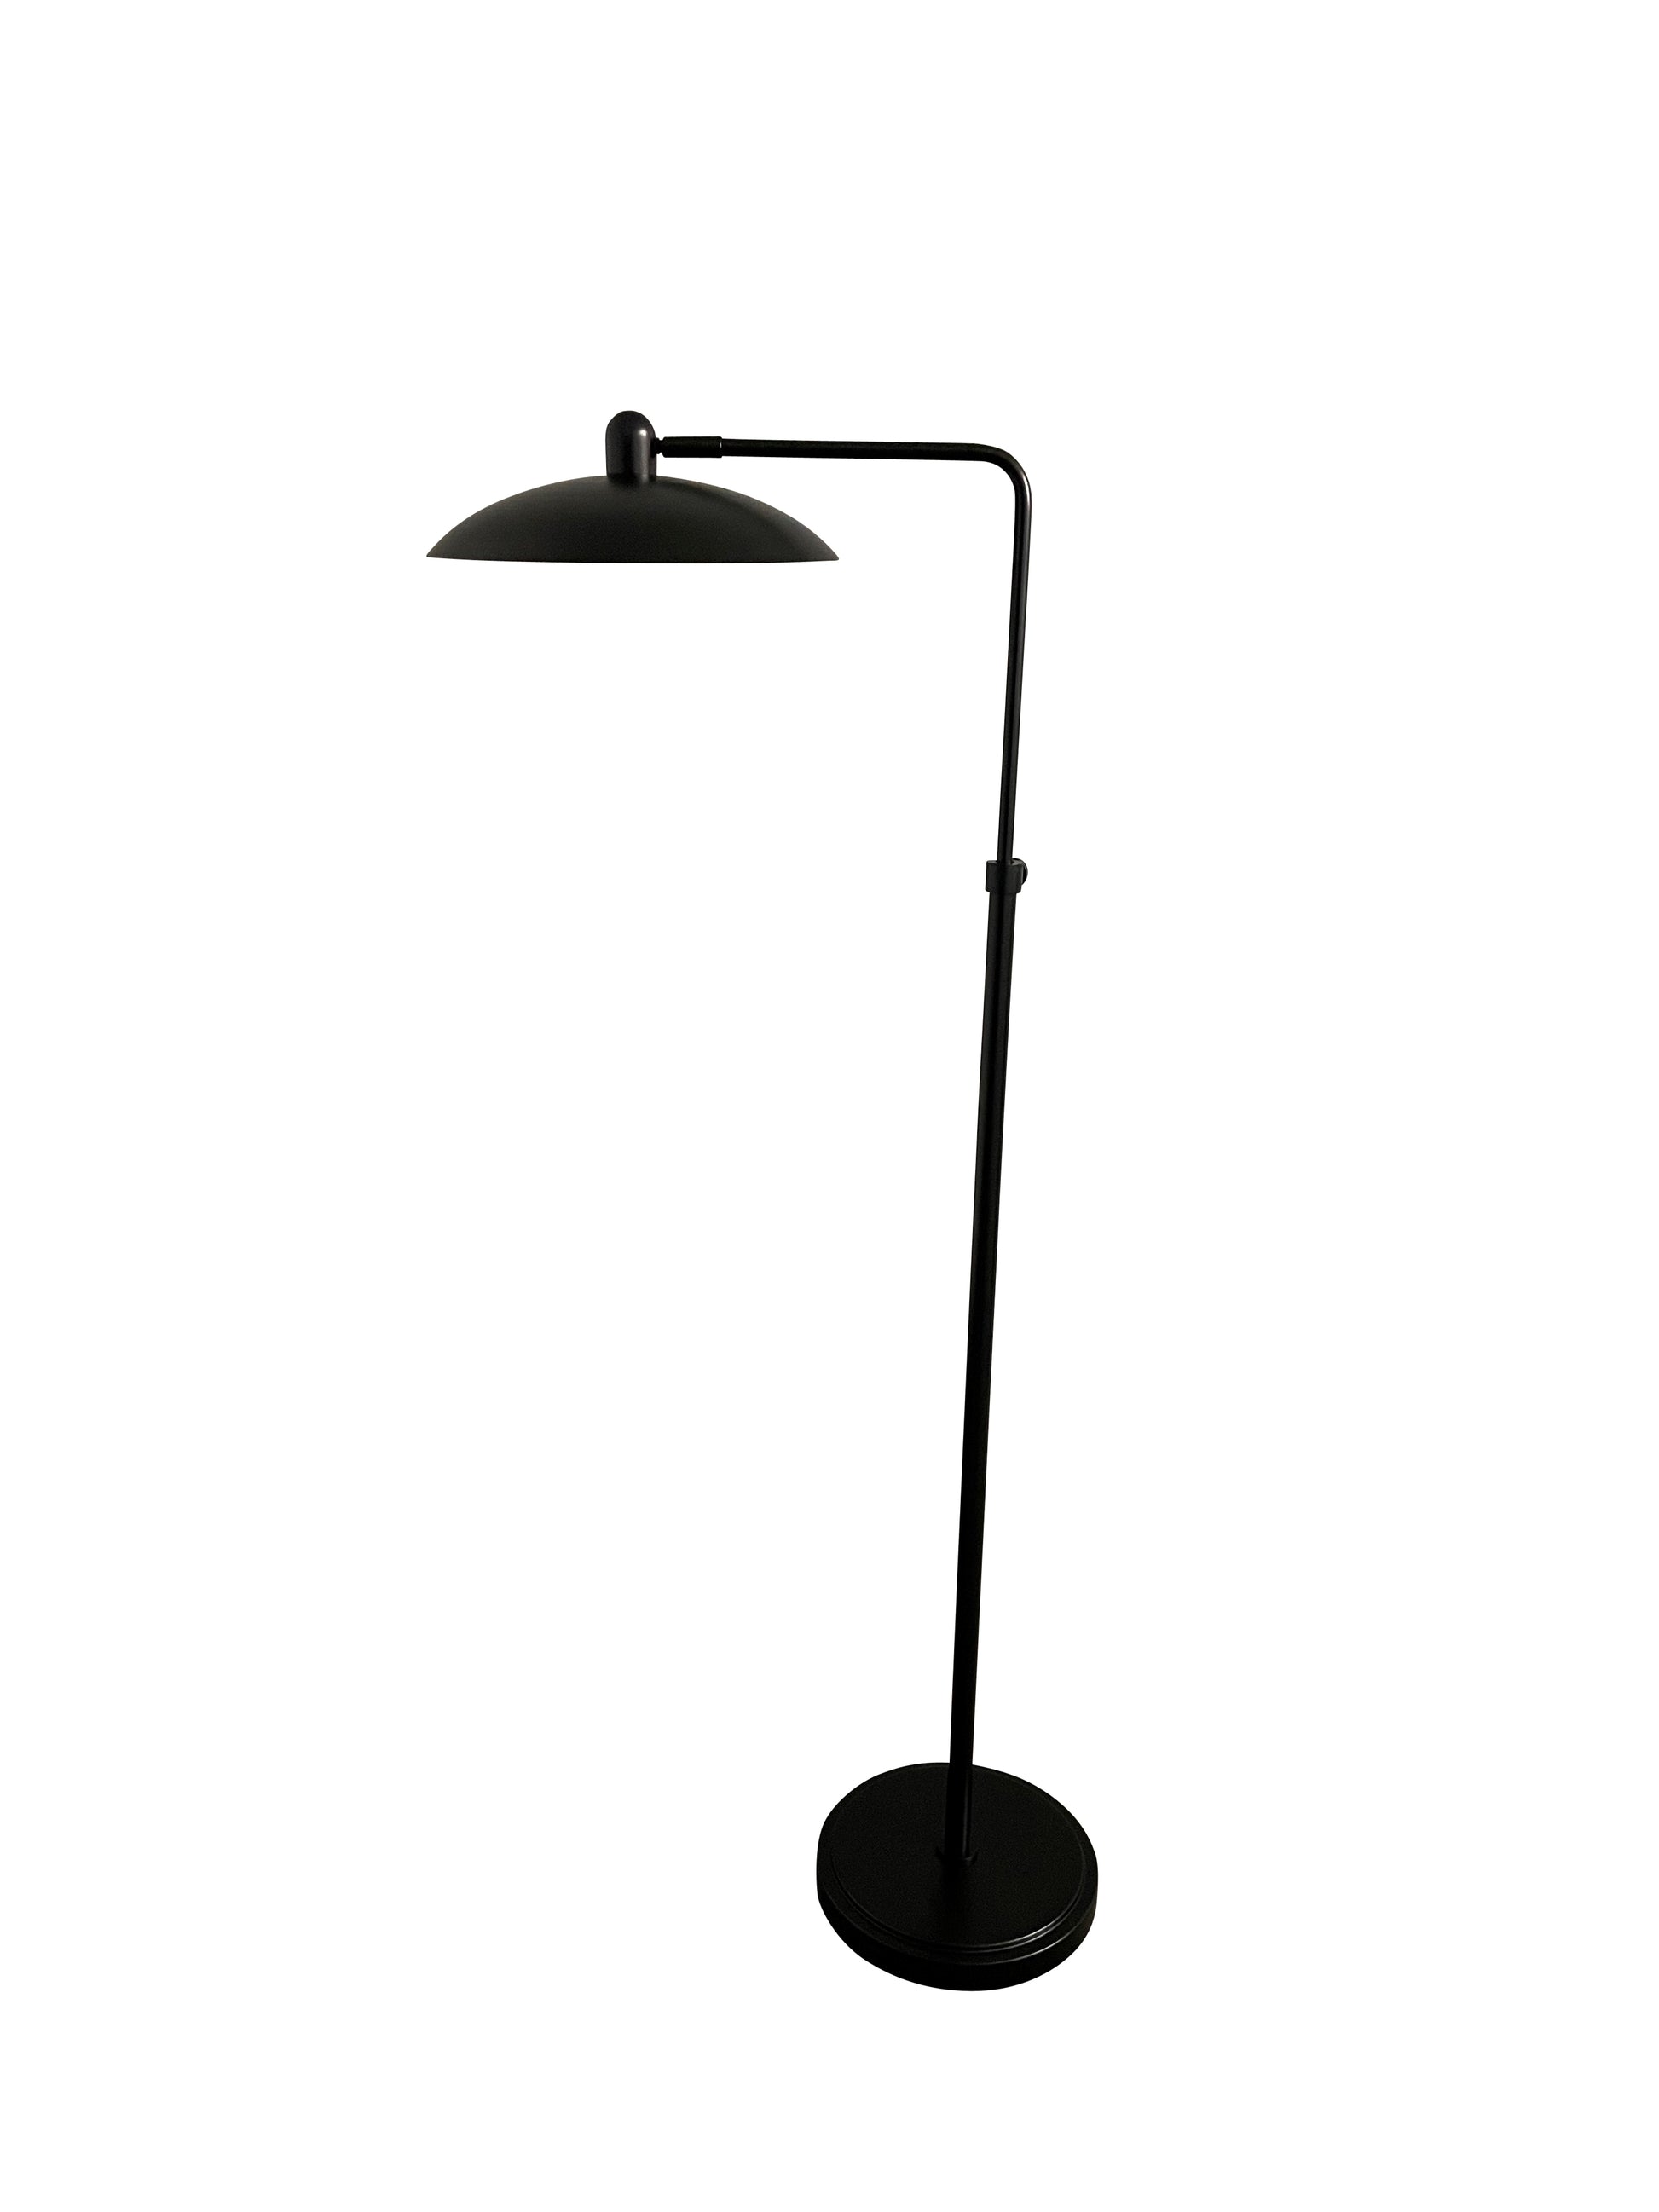 House of Troy Ridgeline black adjustable floor lamp with metal dome shaped shade RL200-BLK